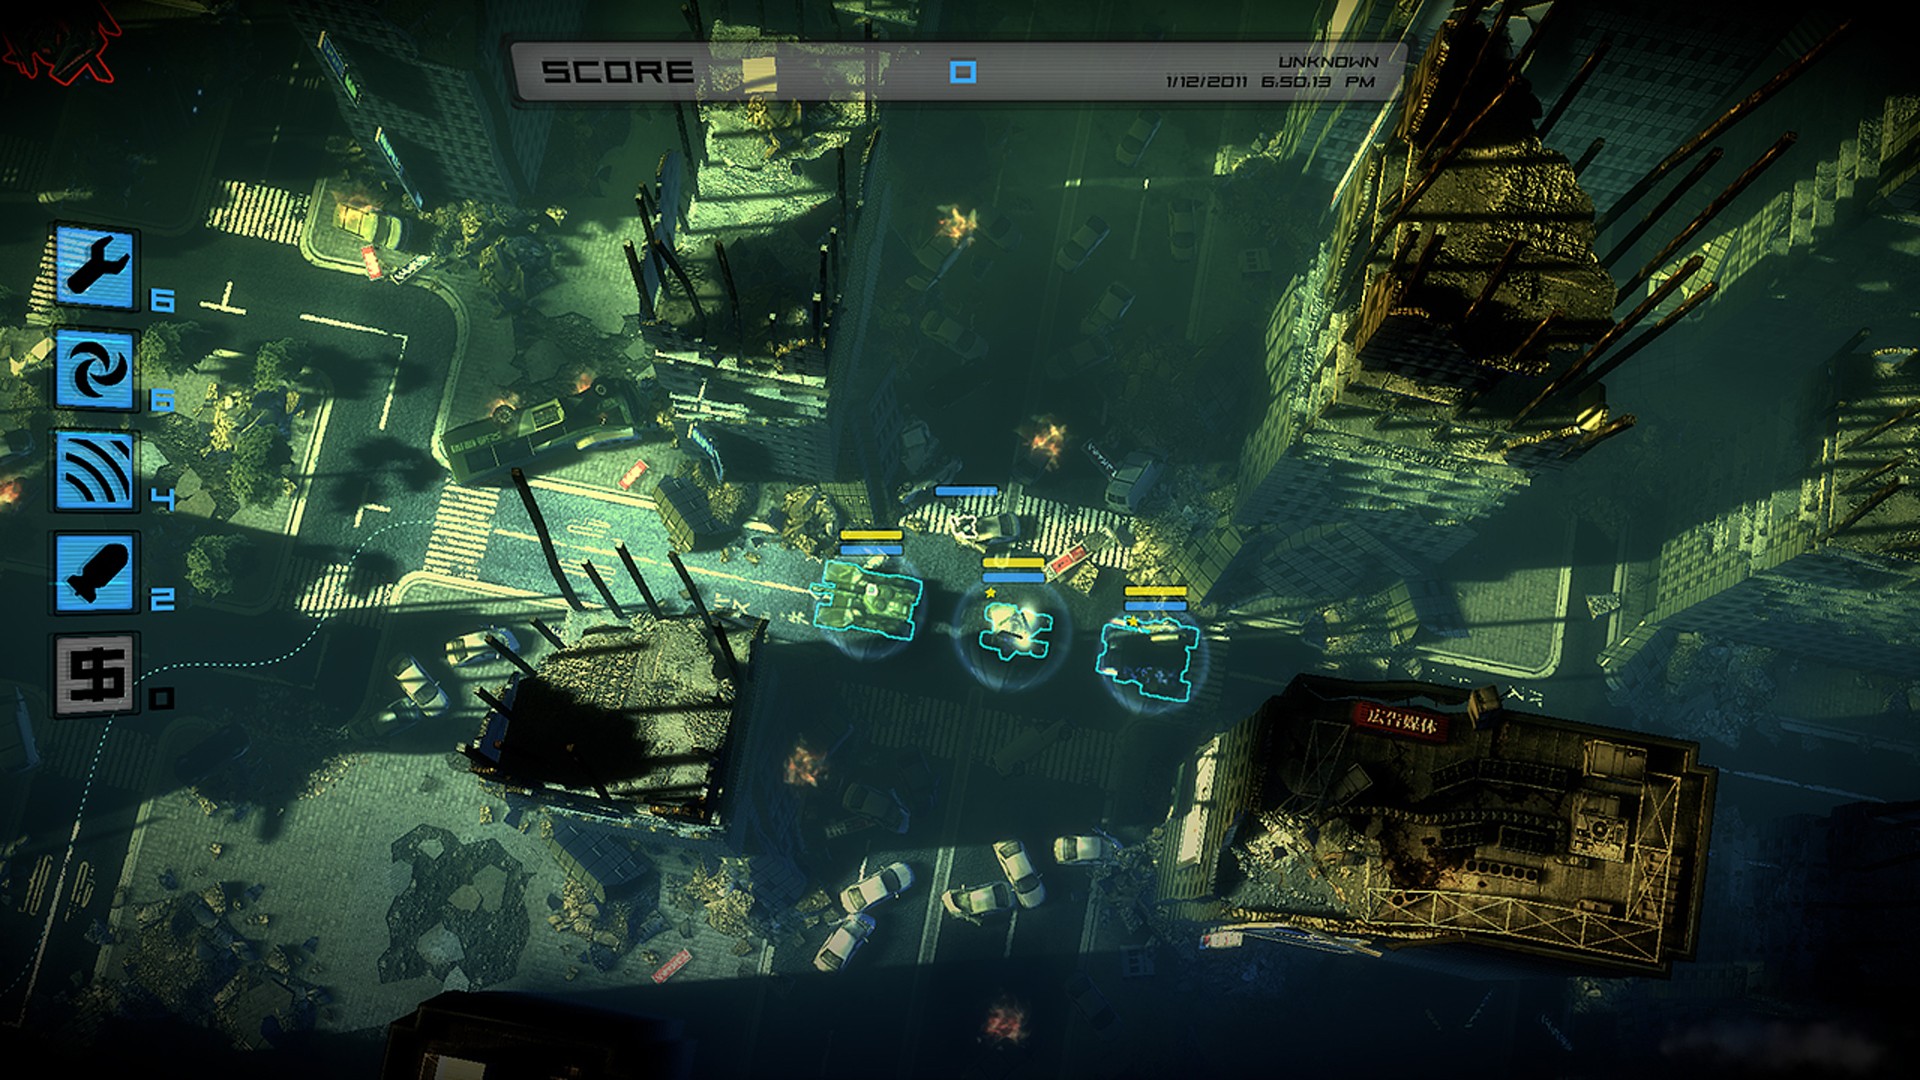 Best Tower Defense Game: Three tanks travel through the dilapidated city streets in Anomaly: Warzone Earth.